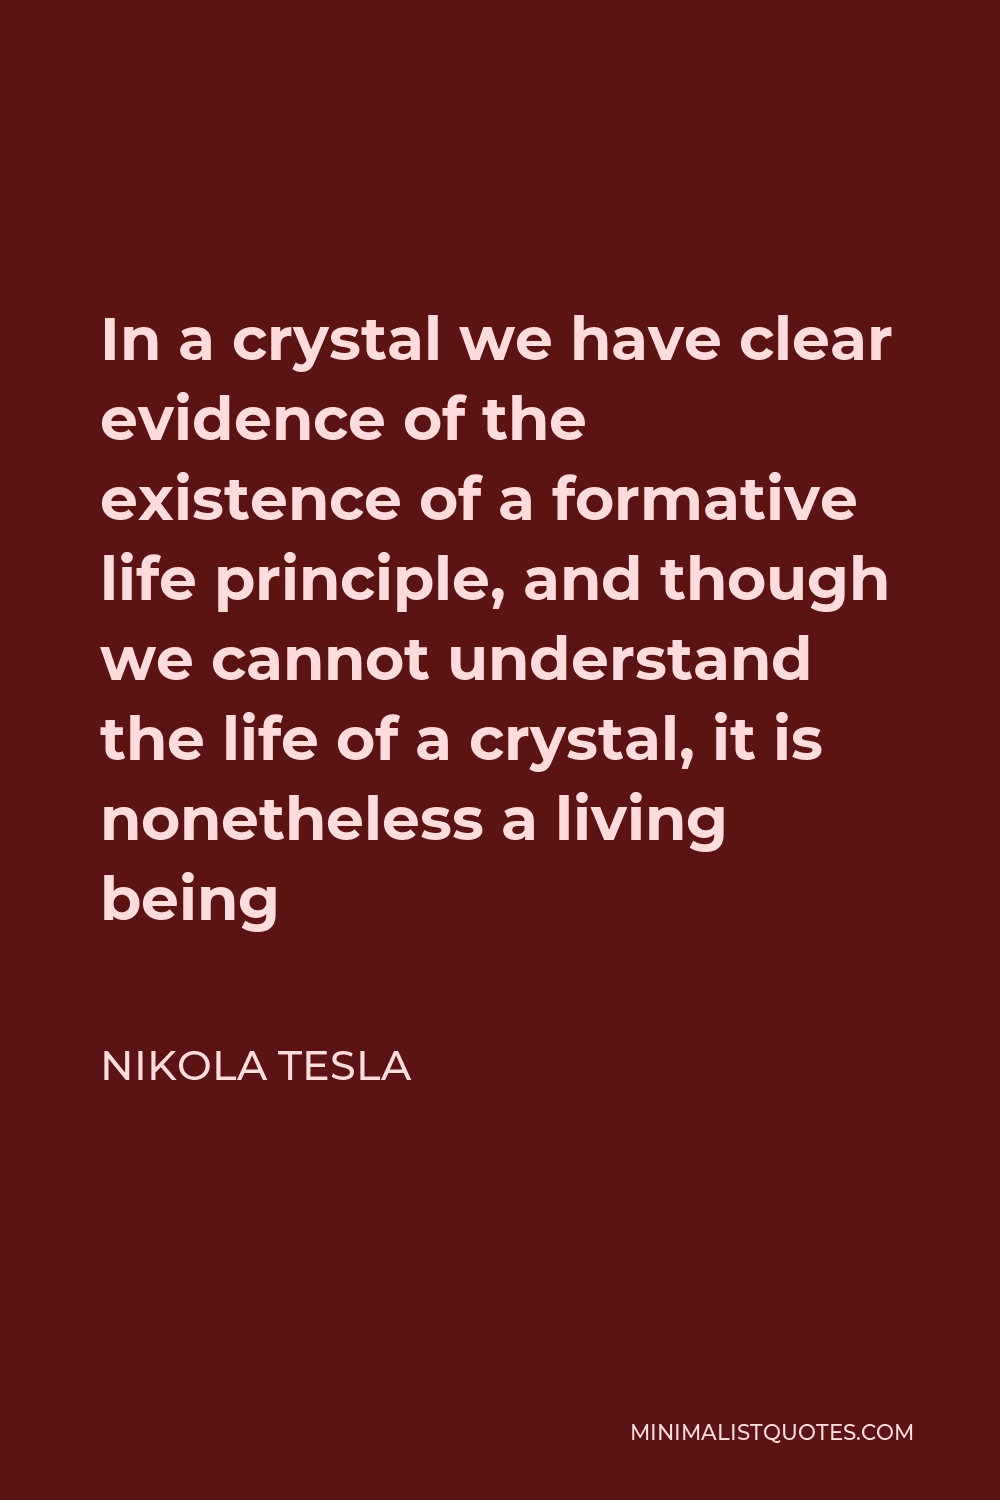 Nikola Tesla Quote - In a crystal we have clear evidence of the existence of a formative life principle, and though we cannot understand the life of a crystal, it is nonetheless a living being